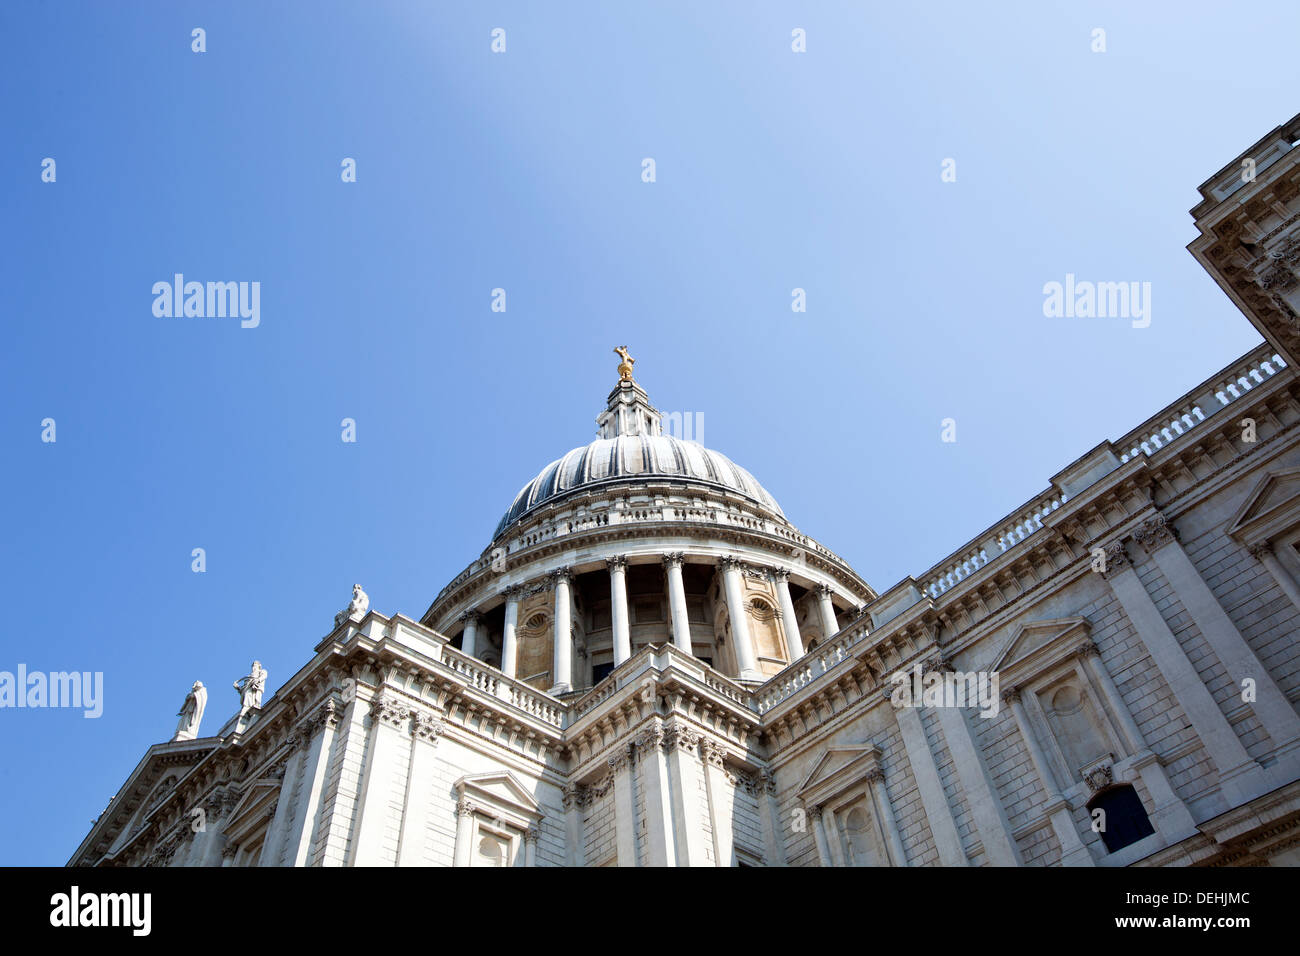 View from below St. Paul's cathedral, London Stock Photo